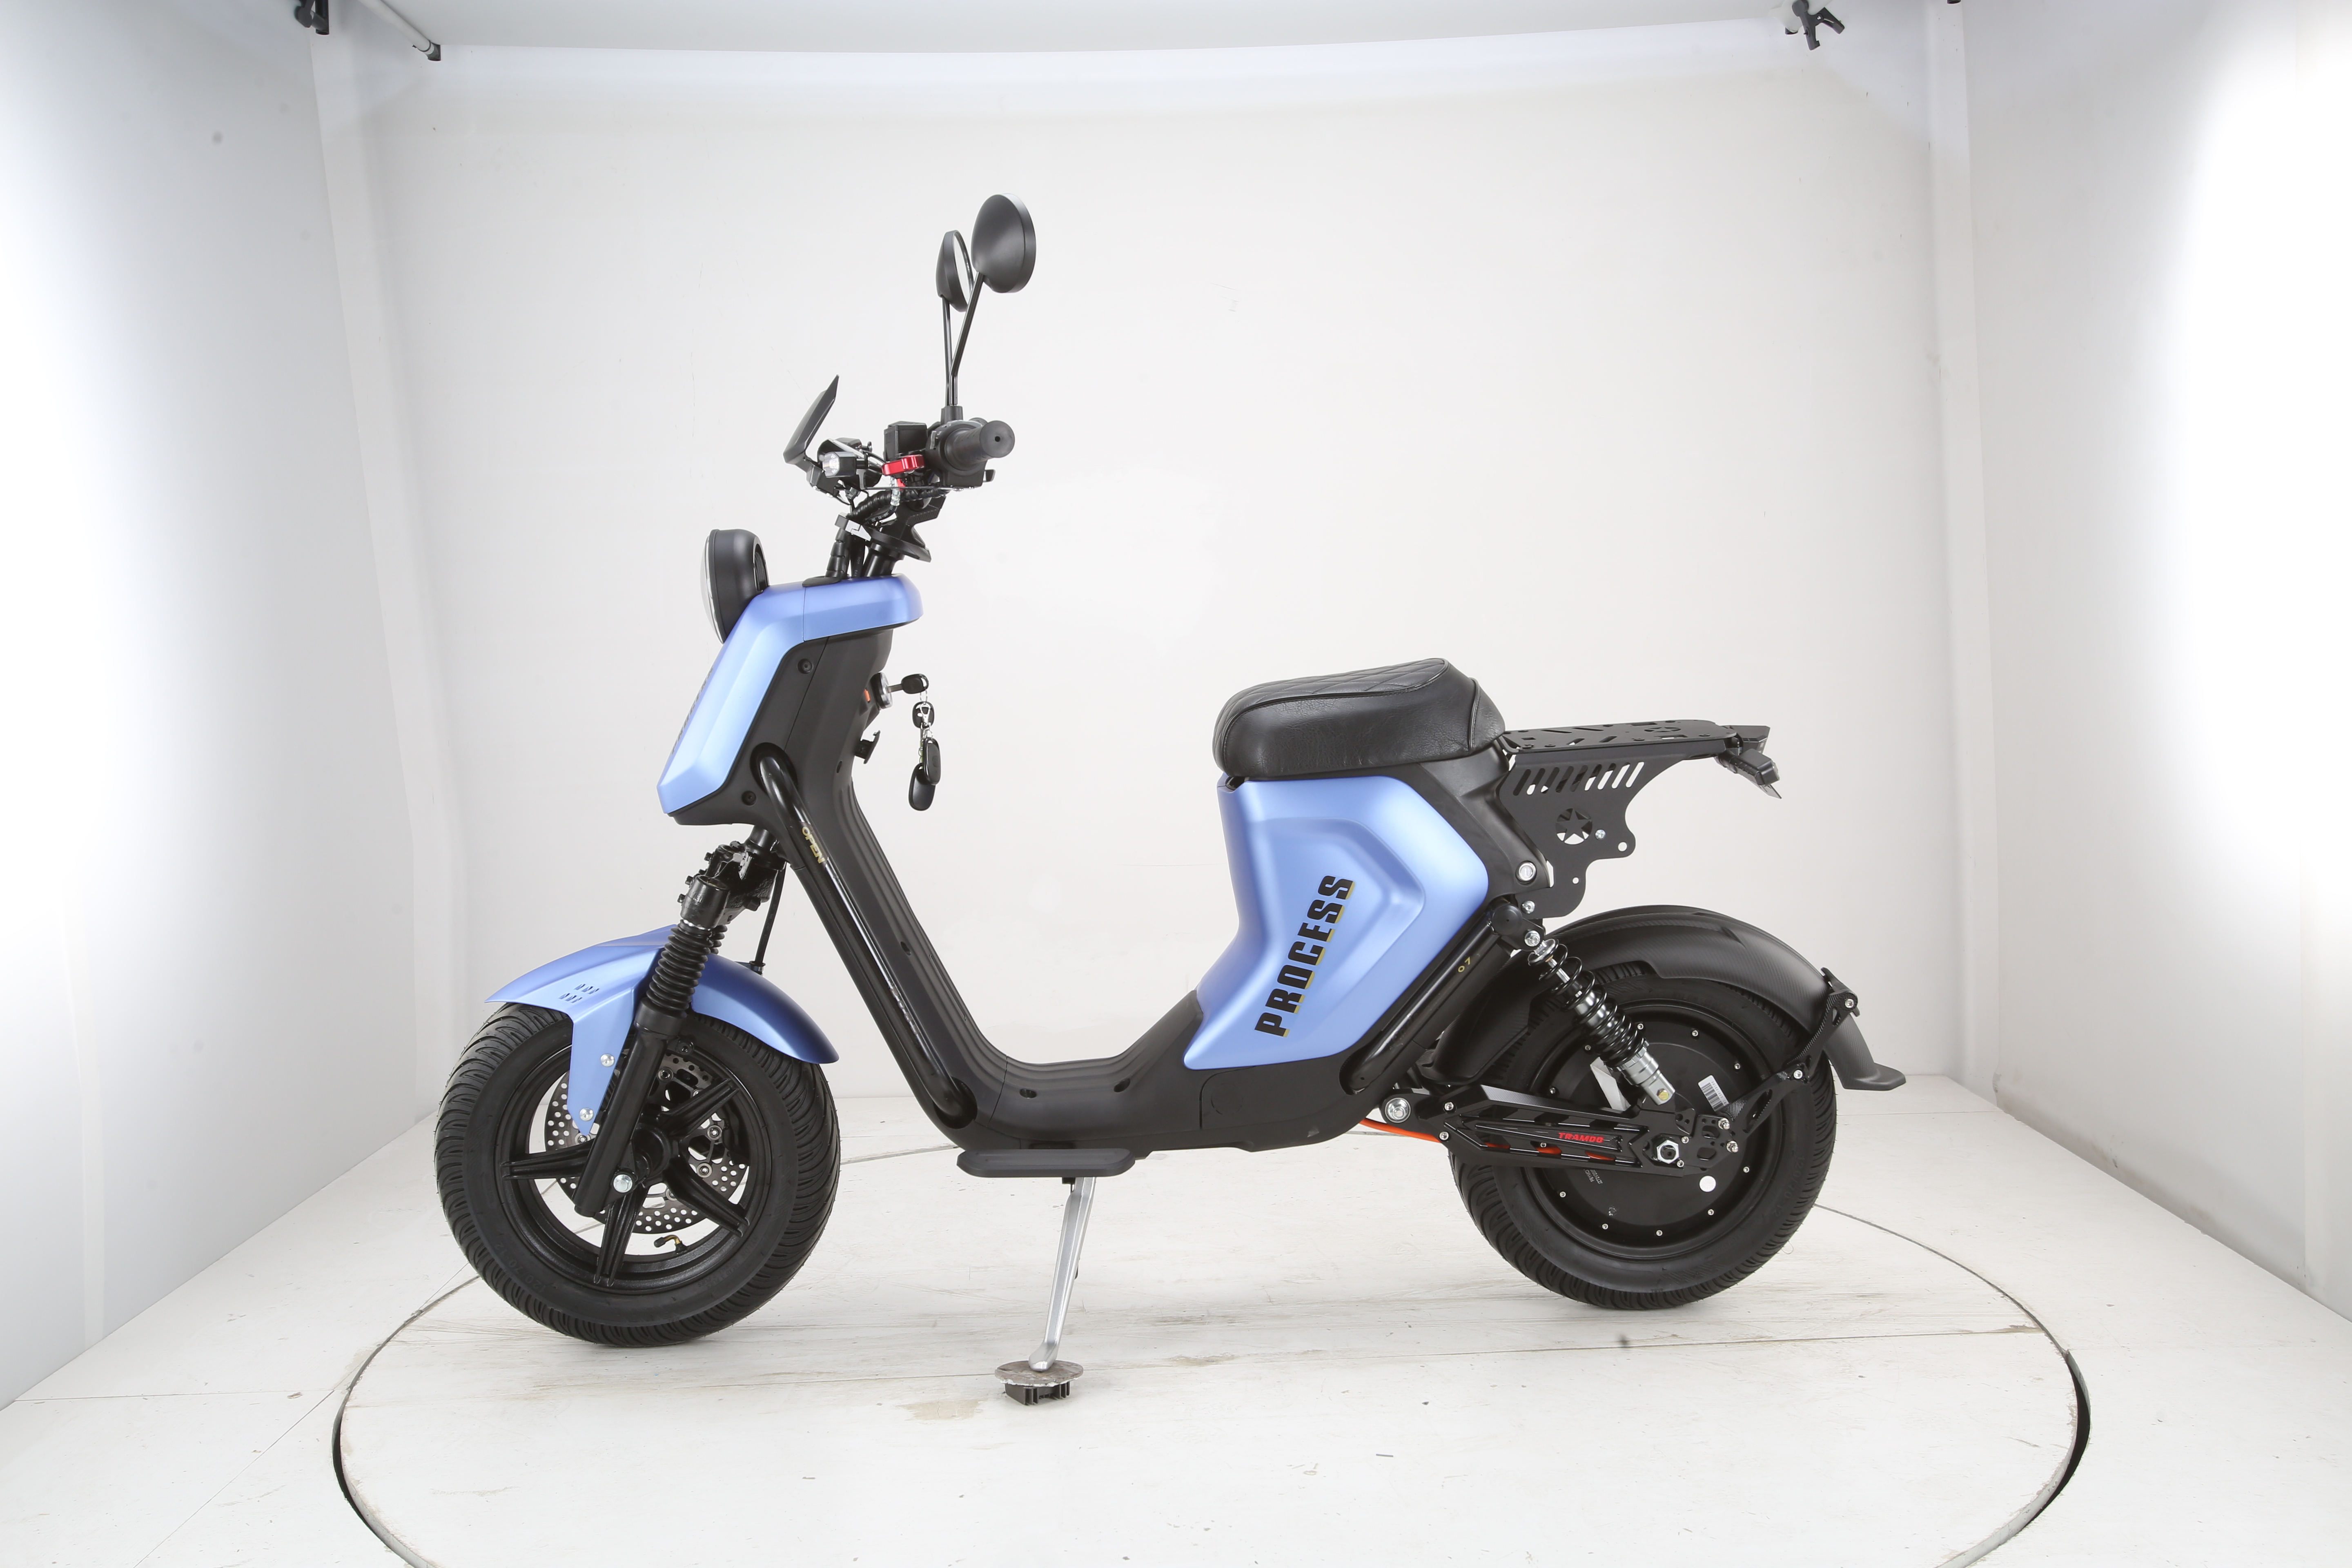 Why choose this two-wheeled electric vehicle?–U2